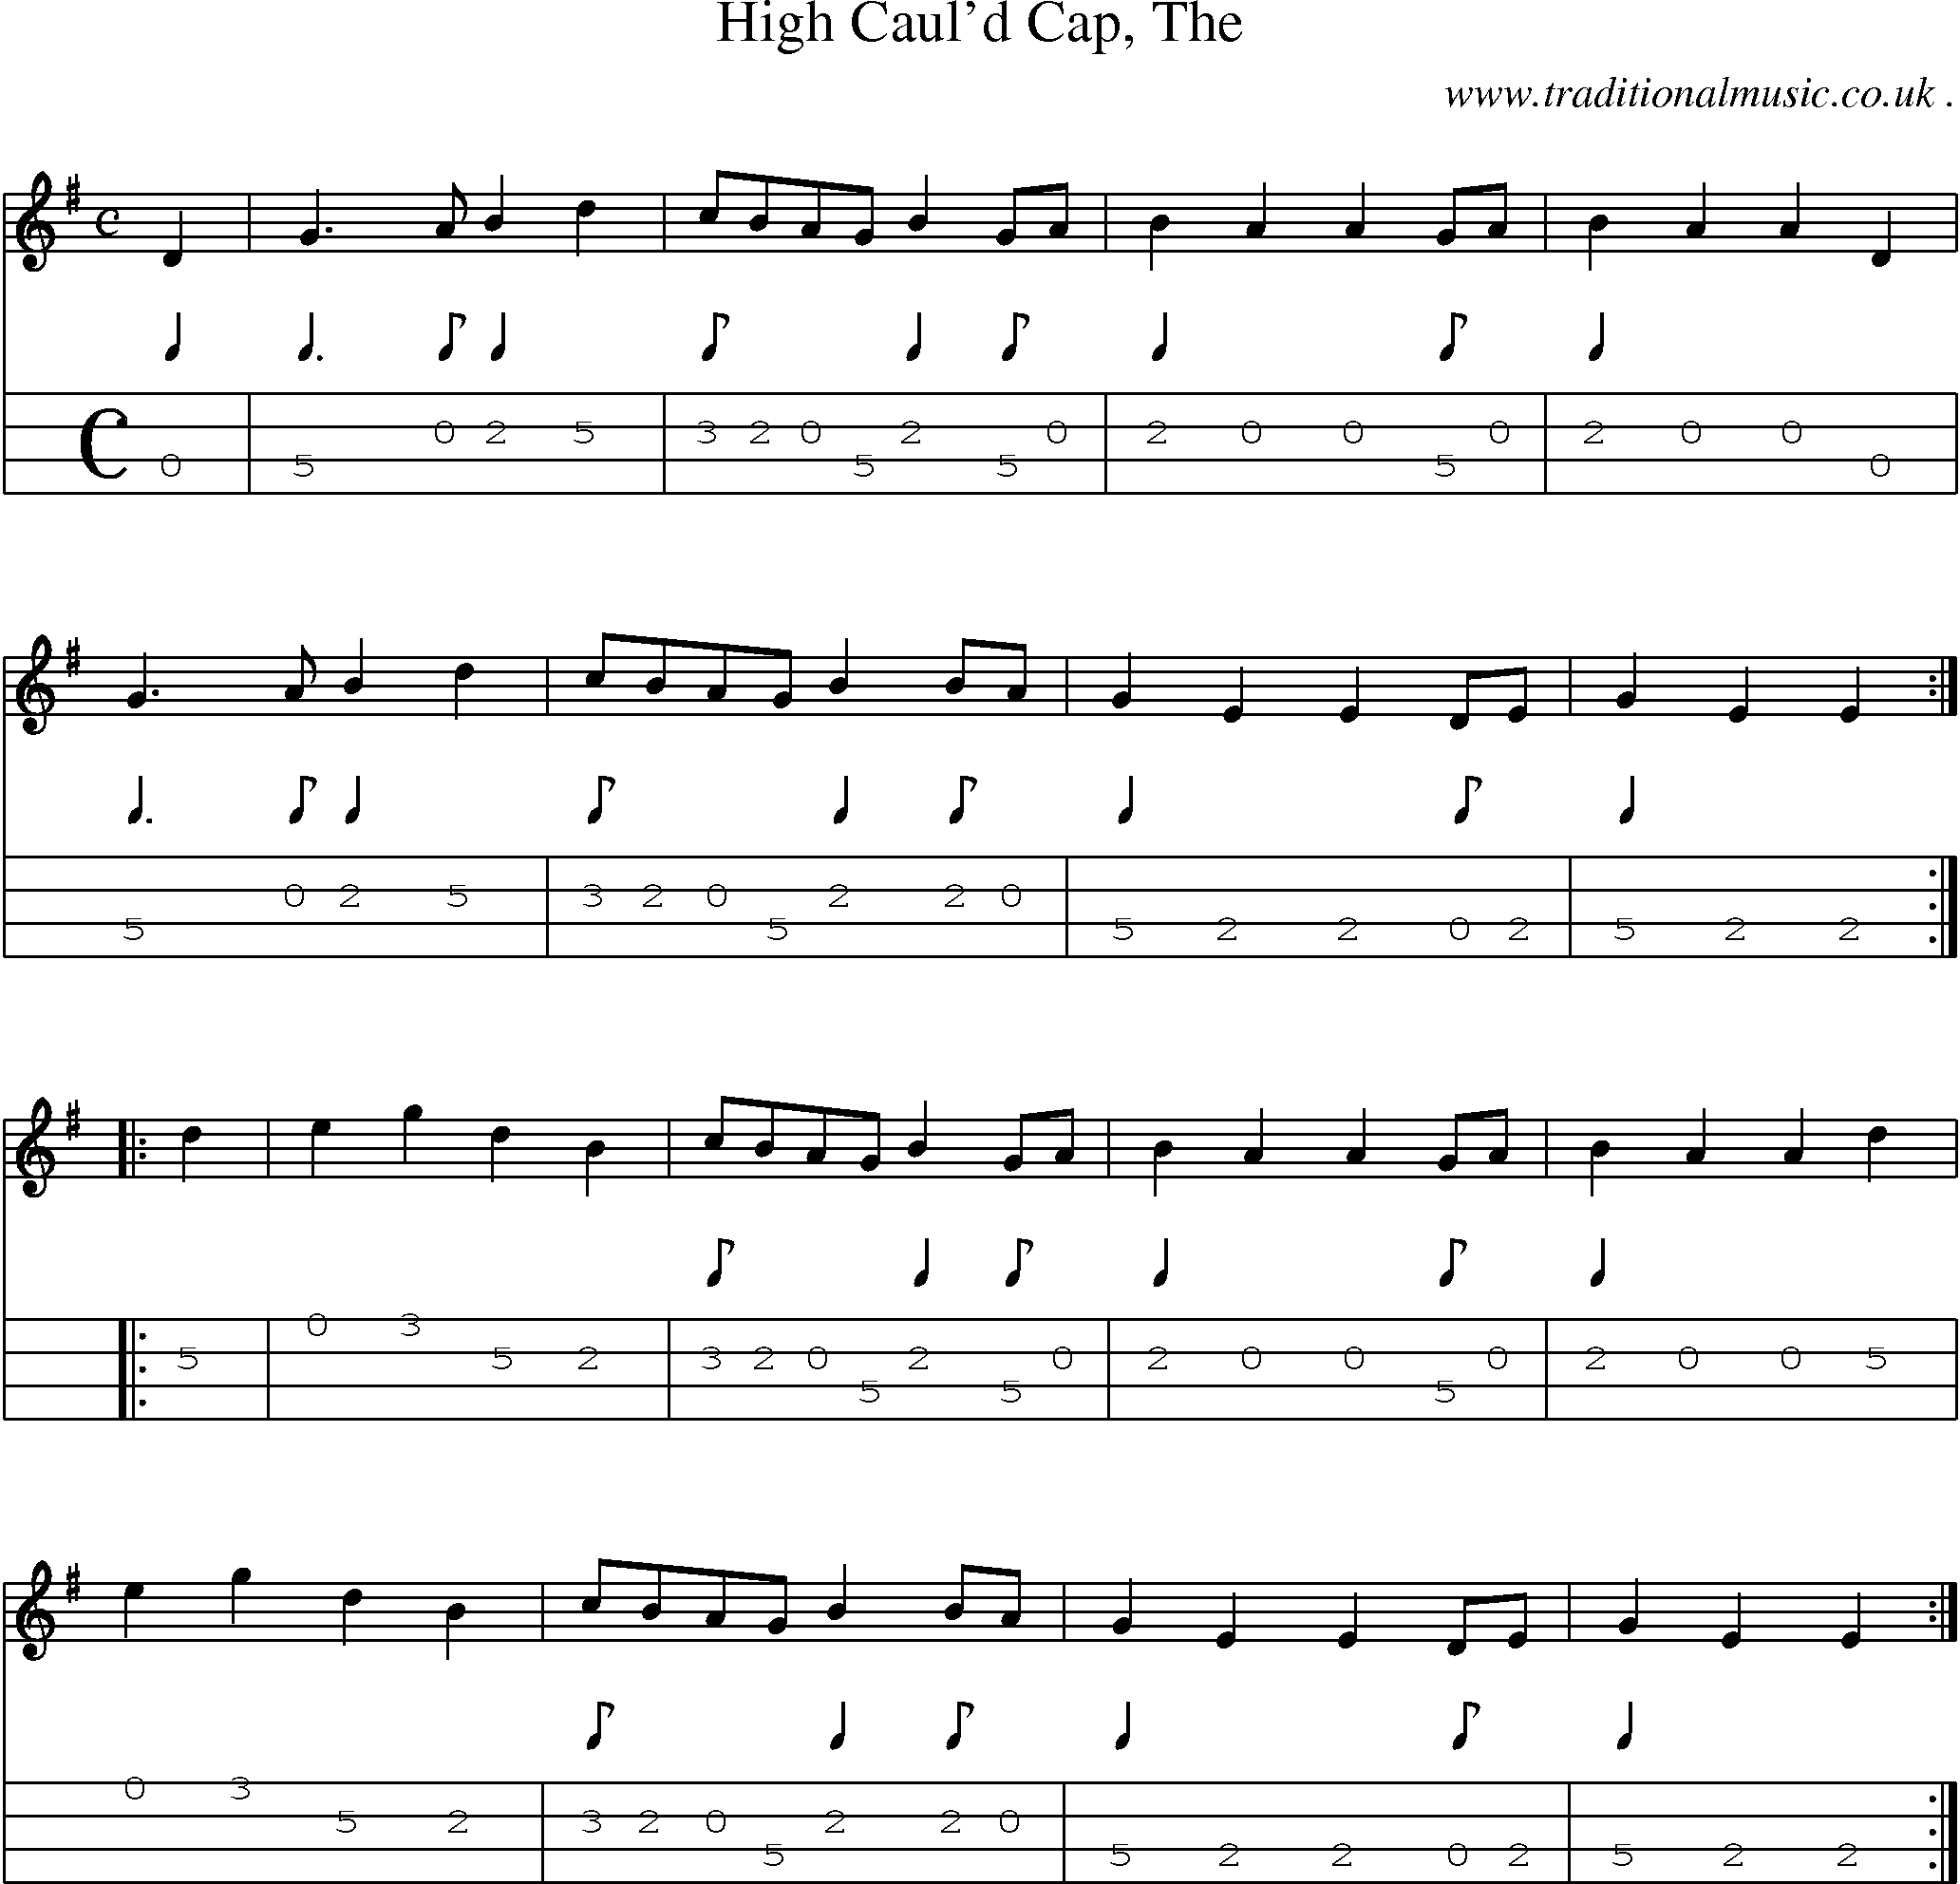 Sheet-music  score, Chords and Mandolin Tabs for High Cauld Cap The